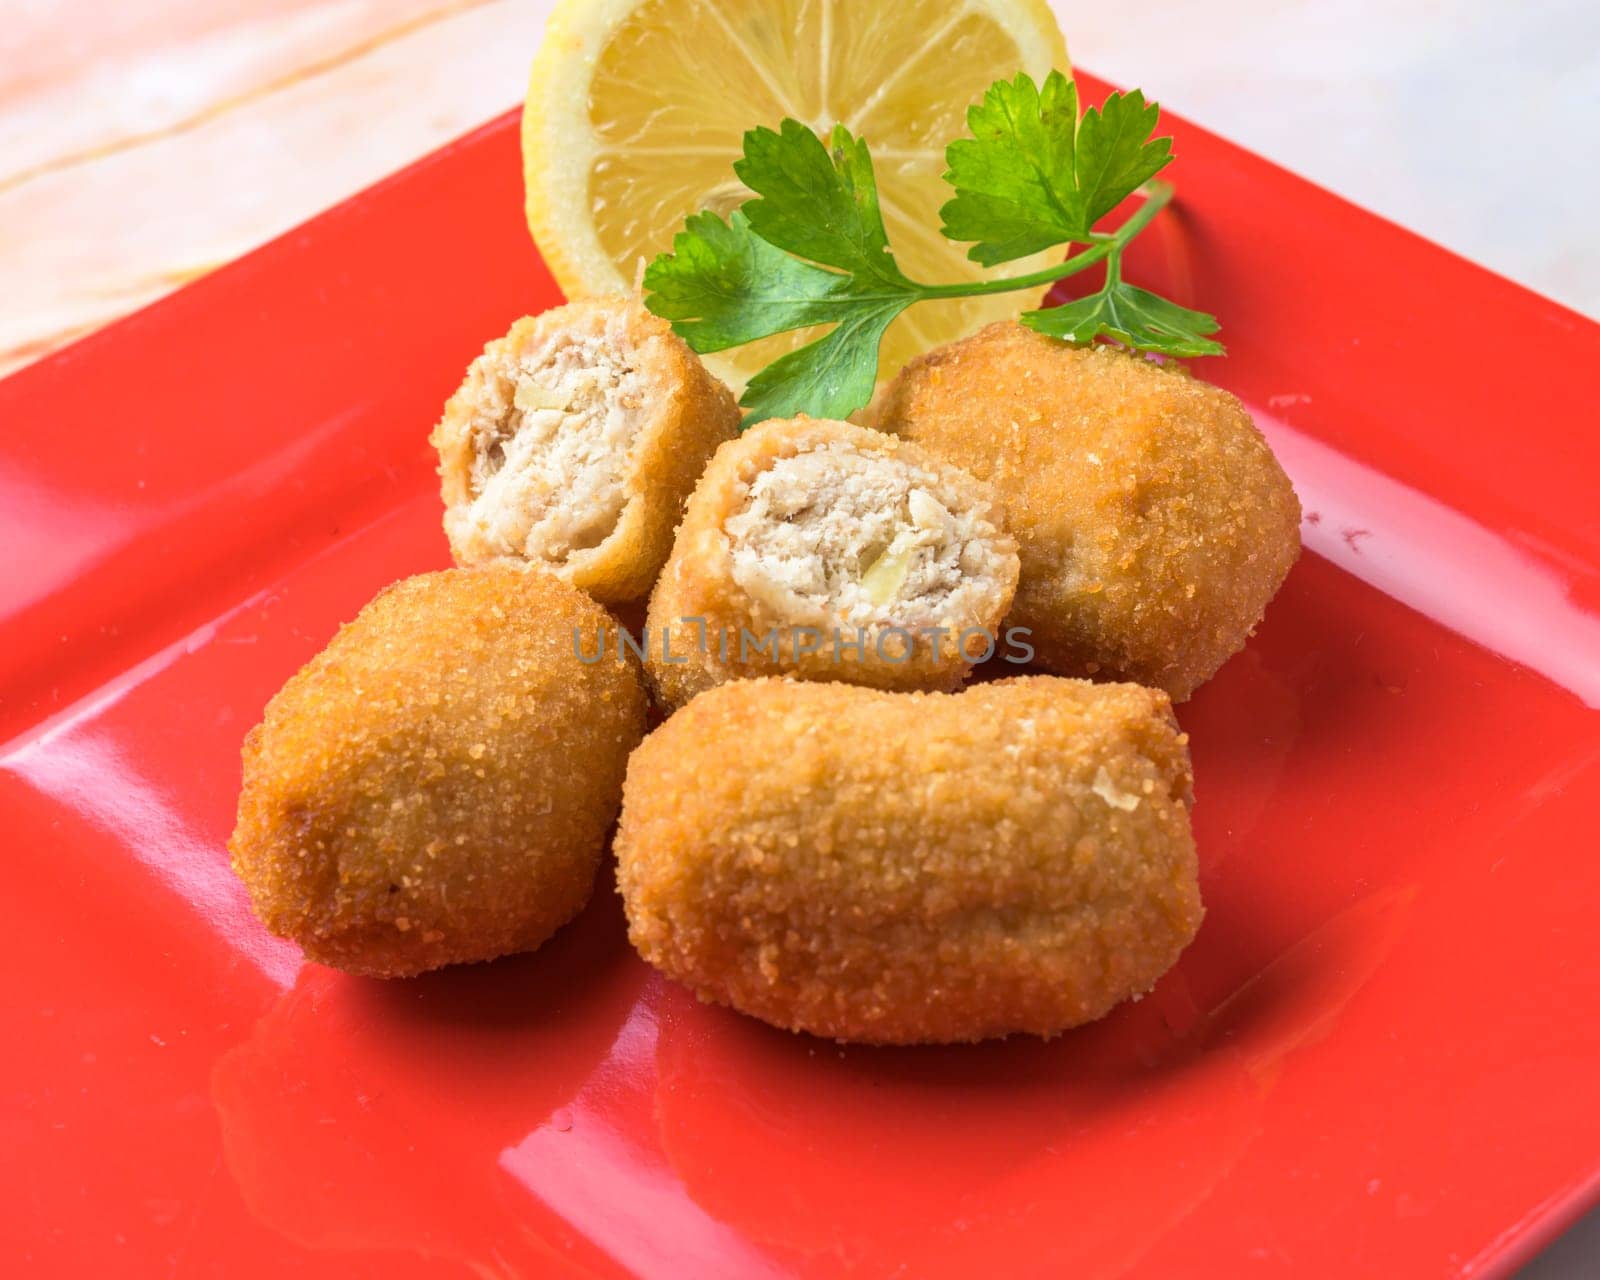 Fried croquettes served with a lemon wedge and parsley on a red plate, typical food, typical mediterranean mallorcan cuisine typical from balearic islands mallorca, spain by carlosviv